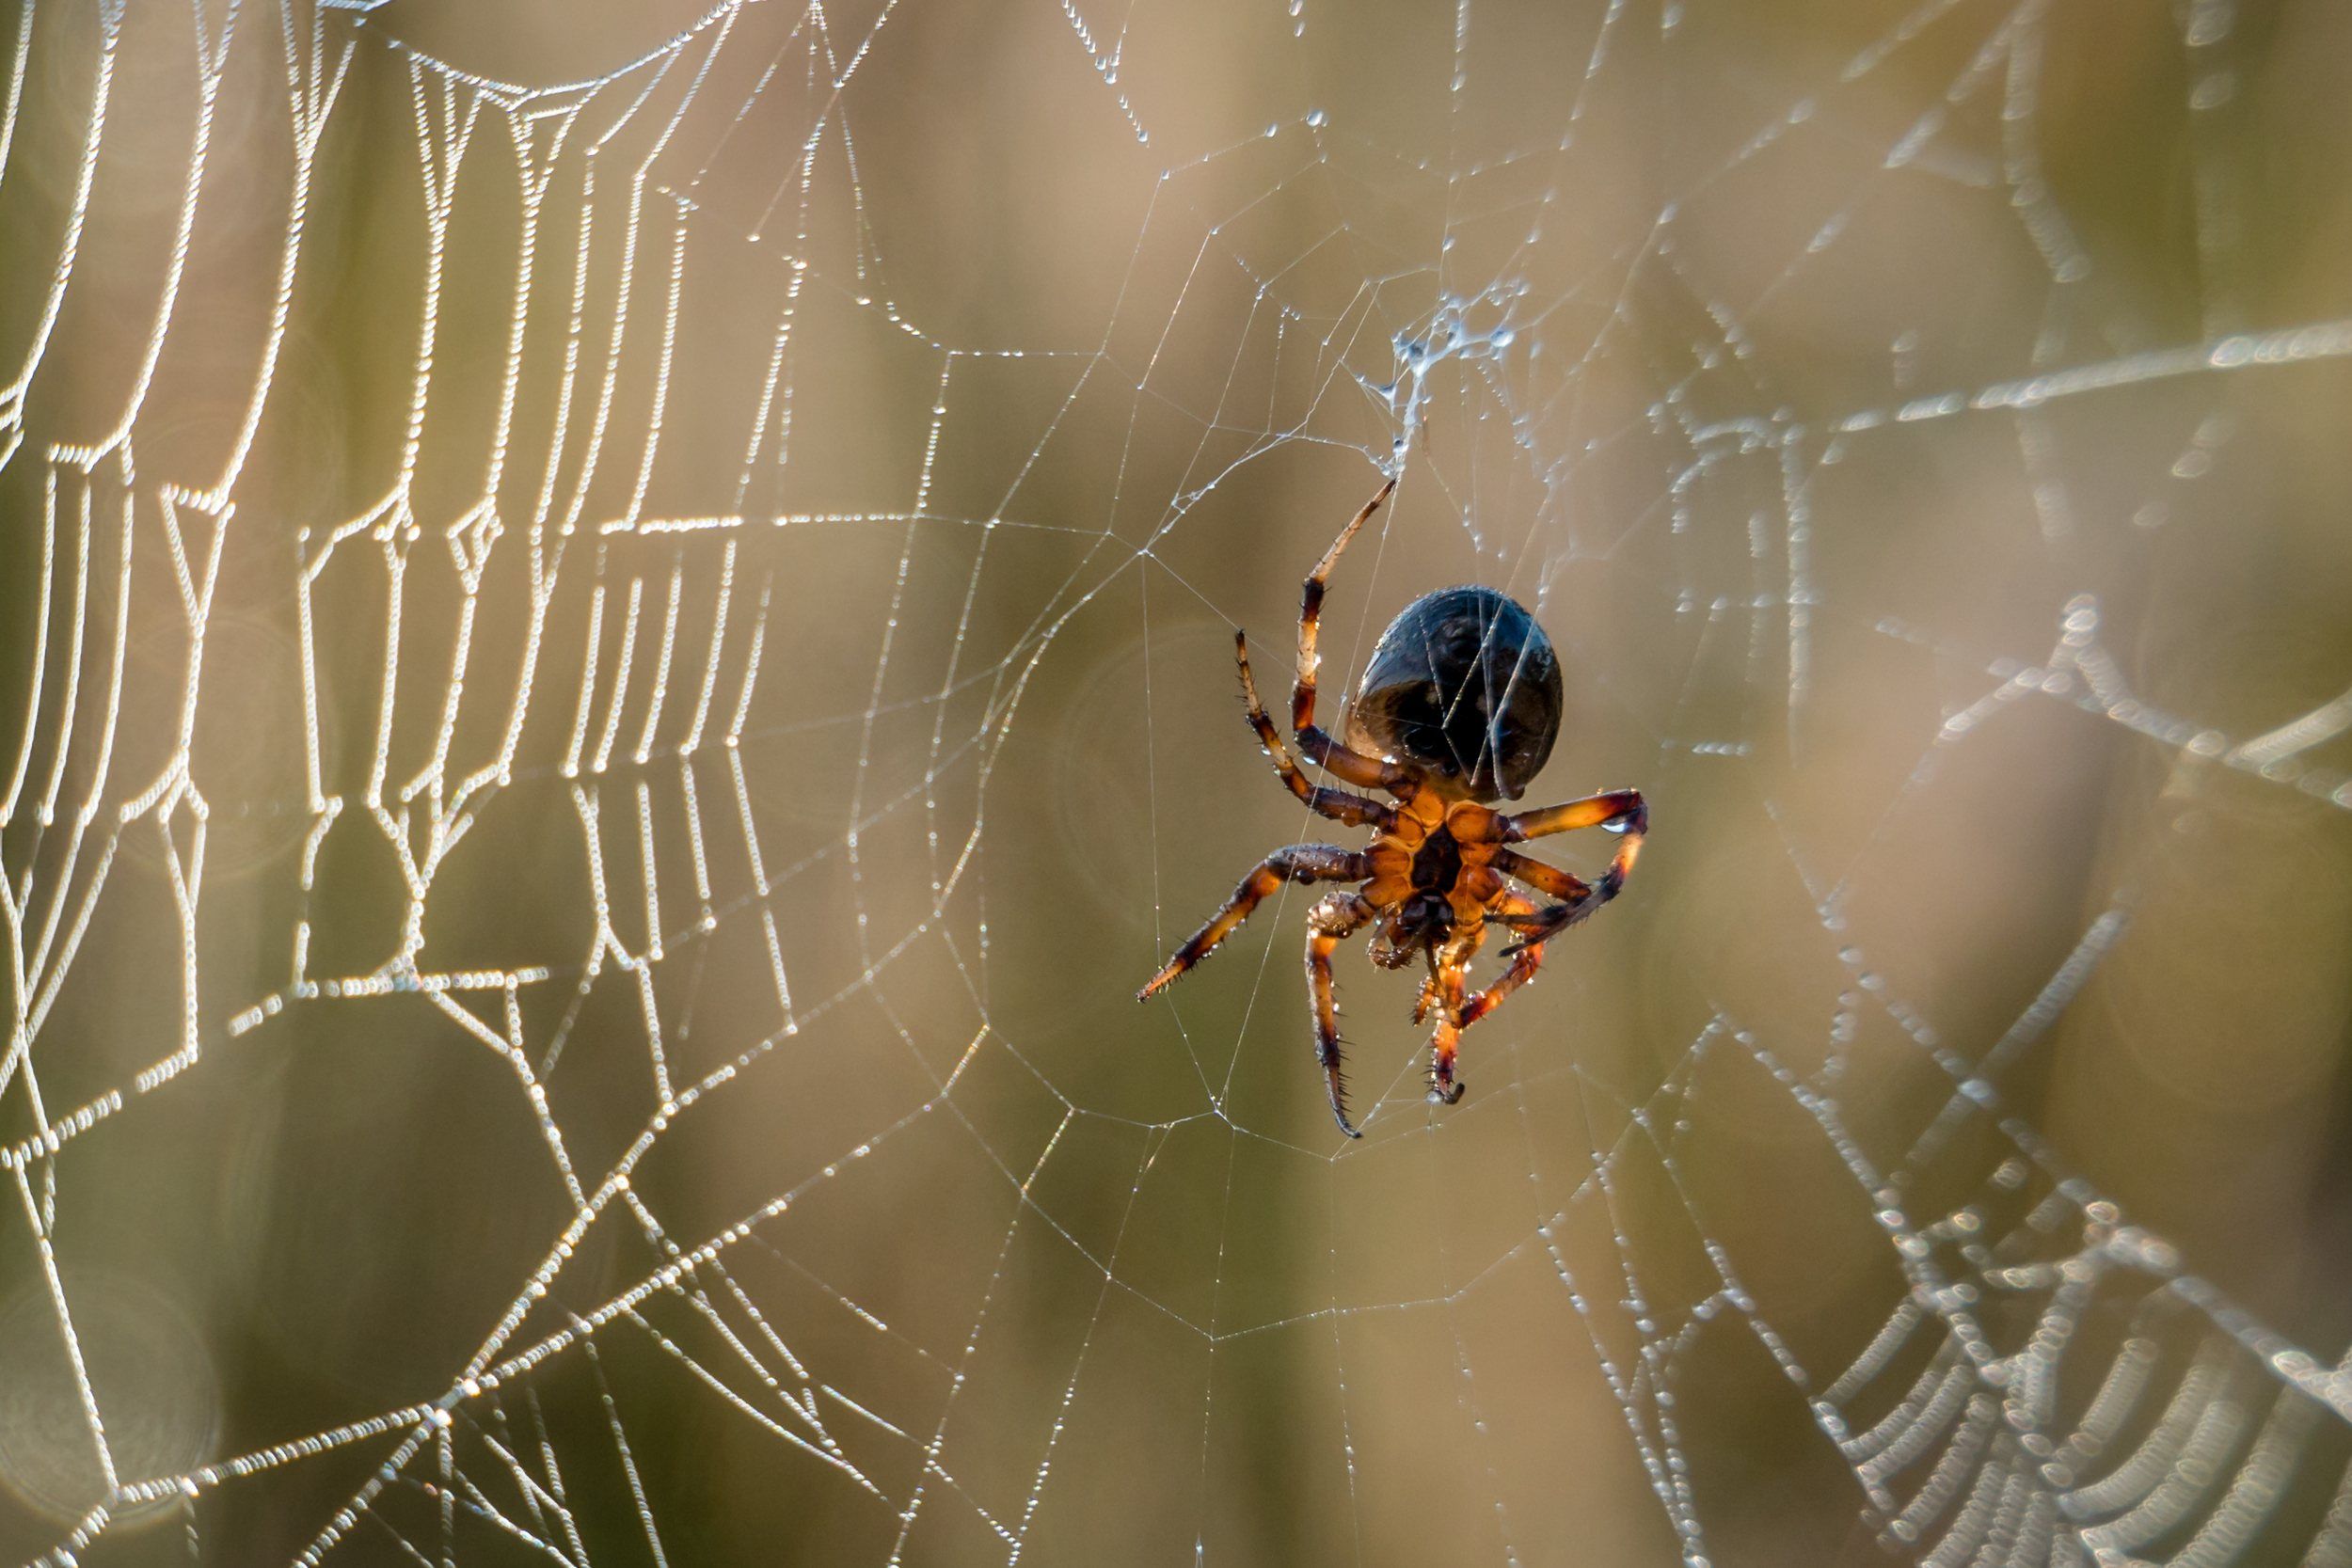 Hints and Tips for Dramatic Spider Web Photographs